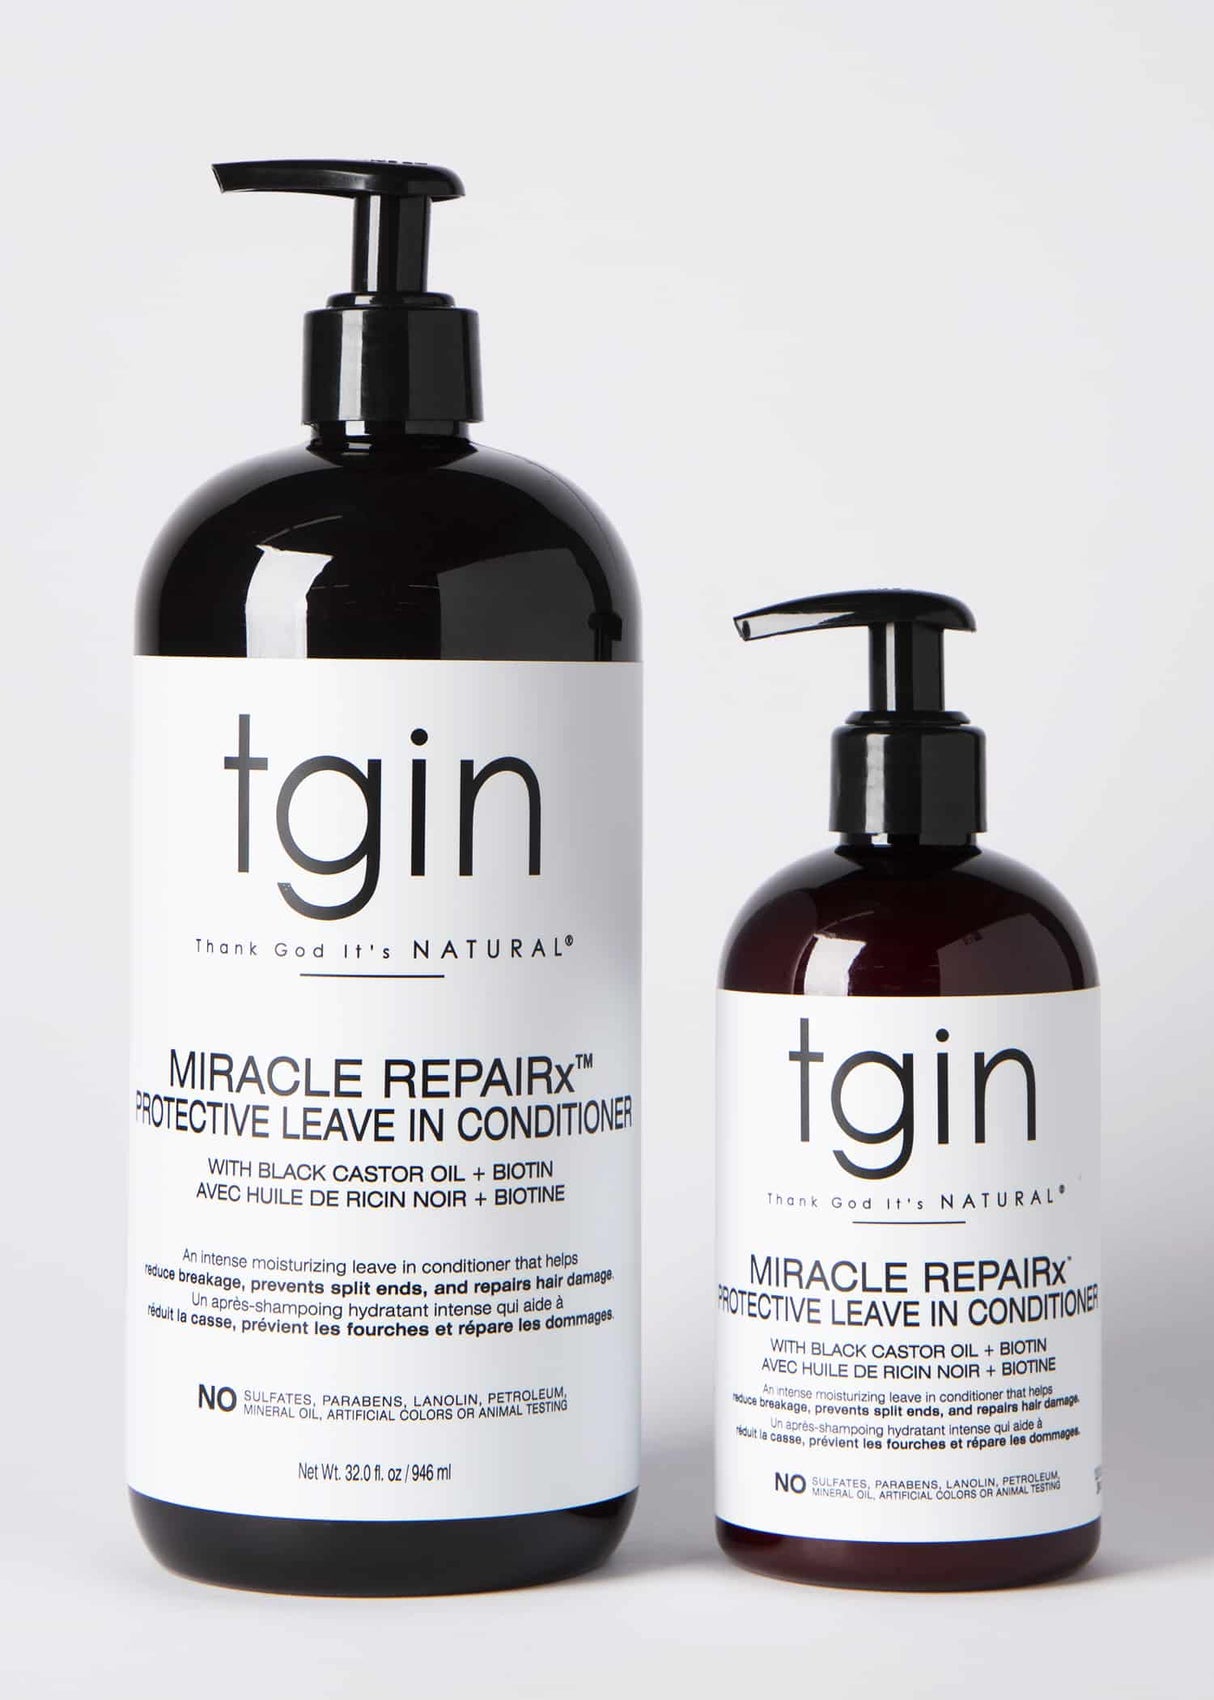 tgin® Miracle RepaiRx Protective Leave in Conditioner